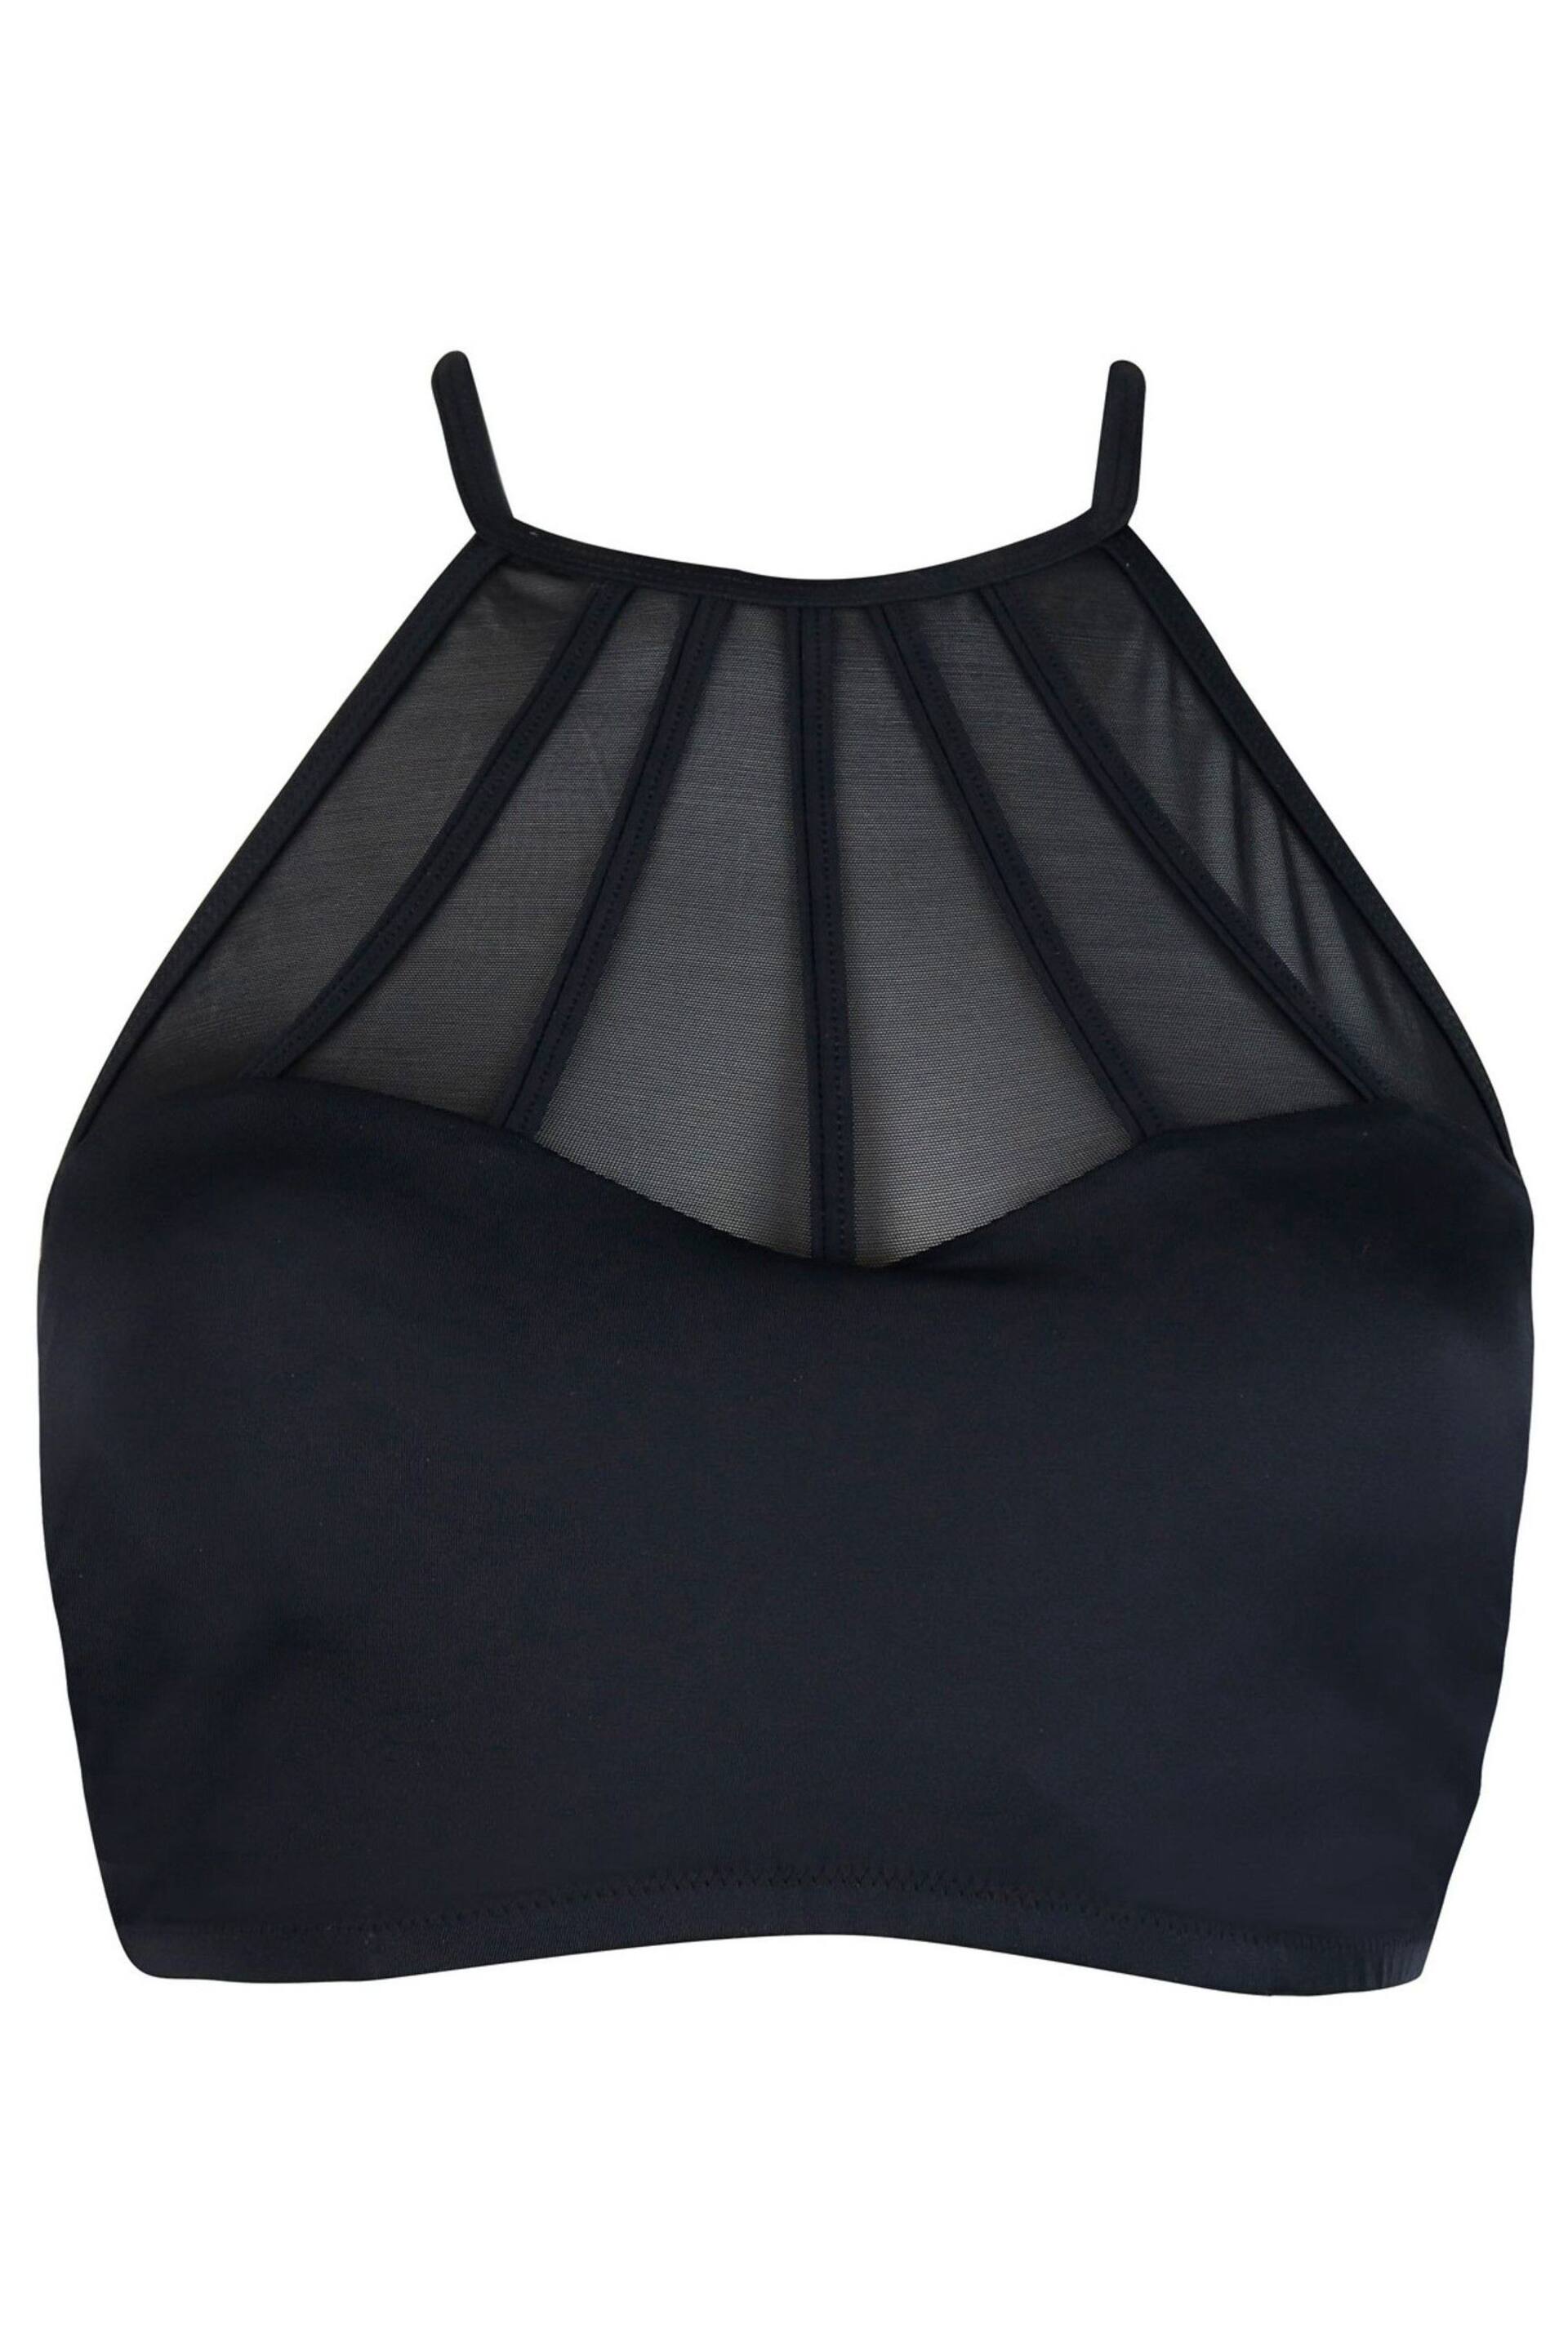 Pour Moi Black Space High Neck Underwired Cami Top - Image 4 of 5